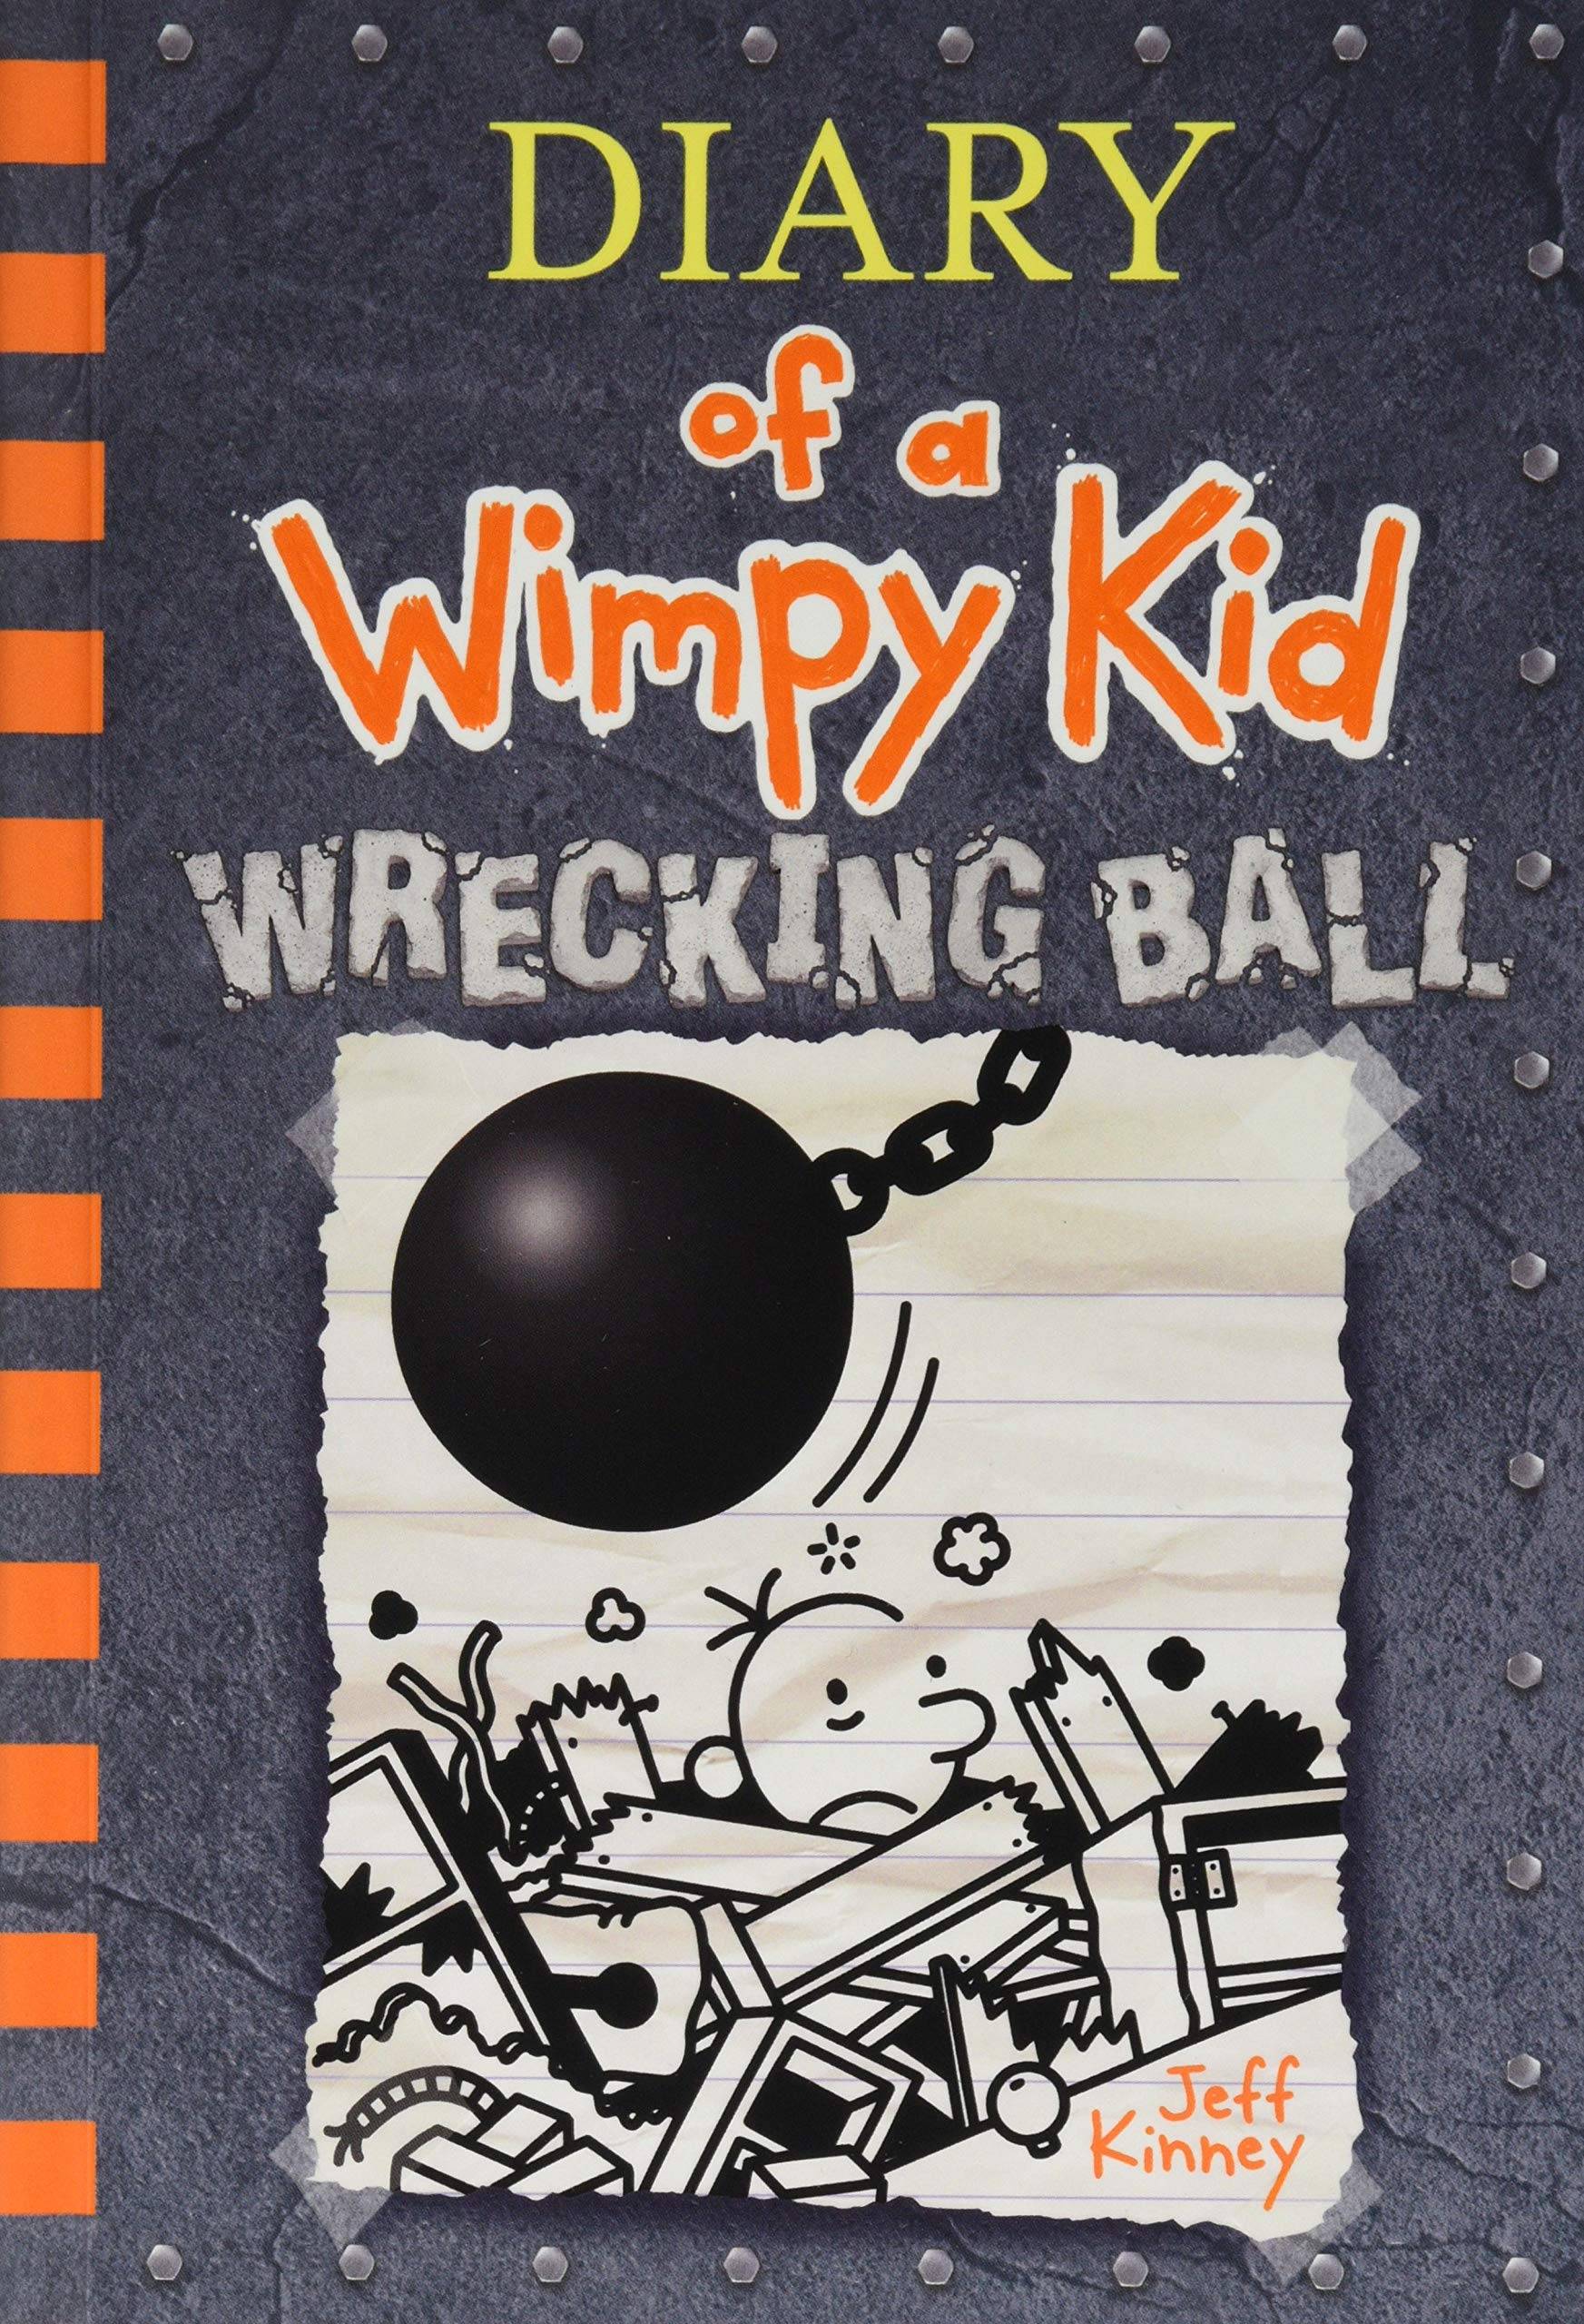 IMG : Diary of a wimpy kid Wrecking Ball